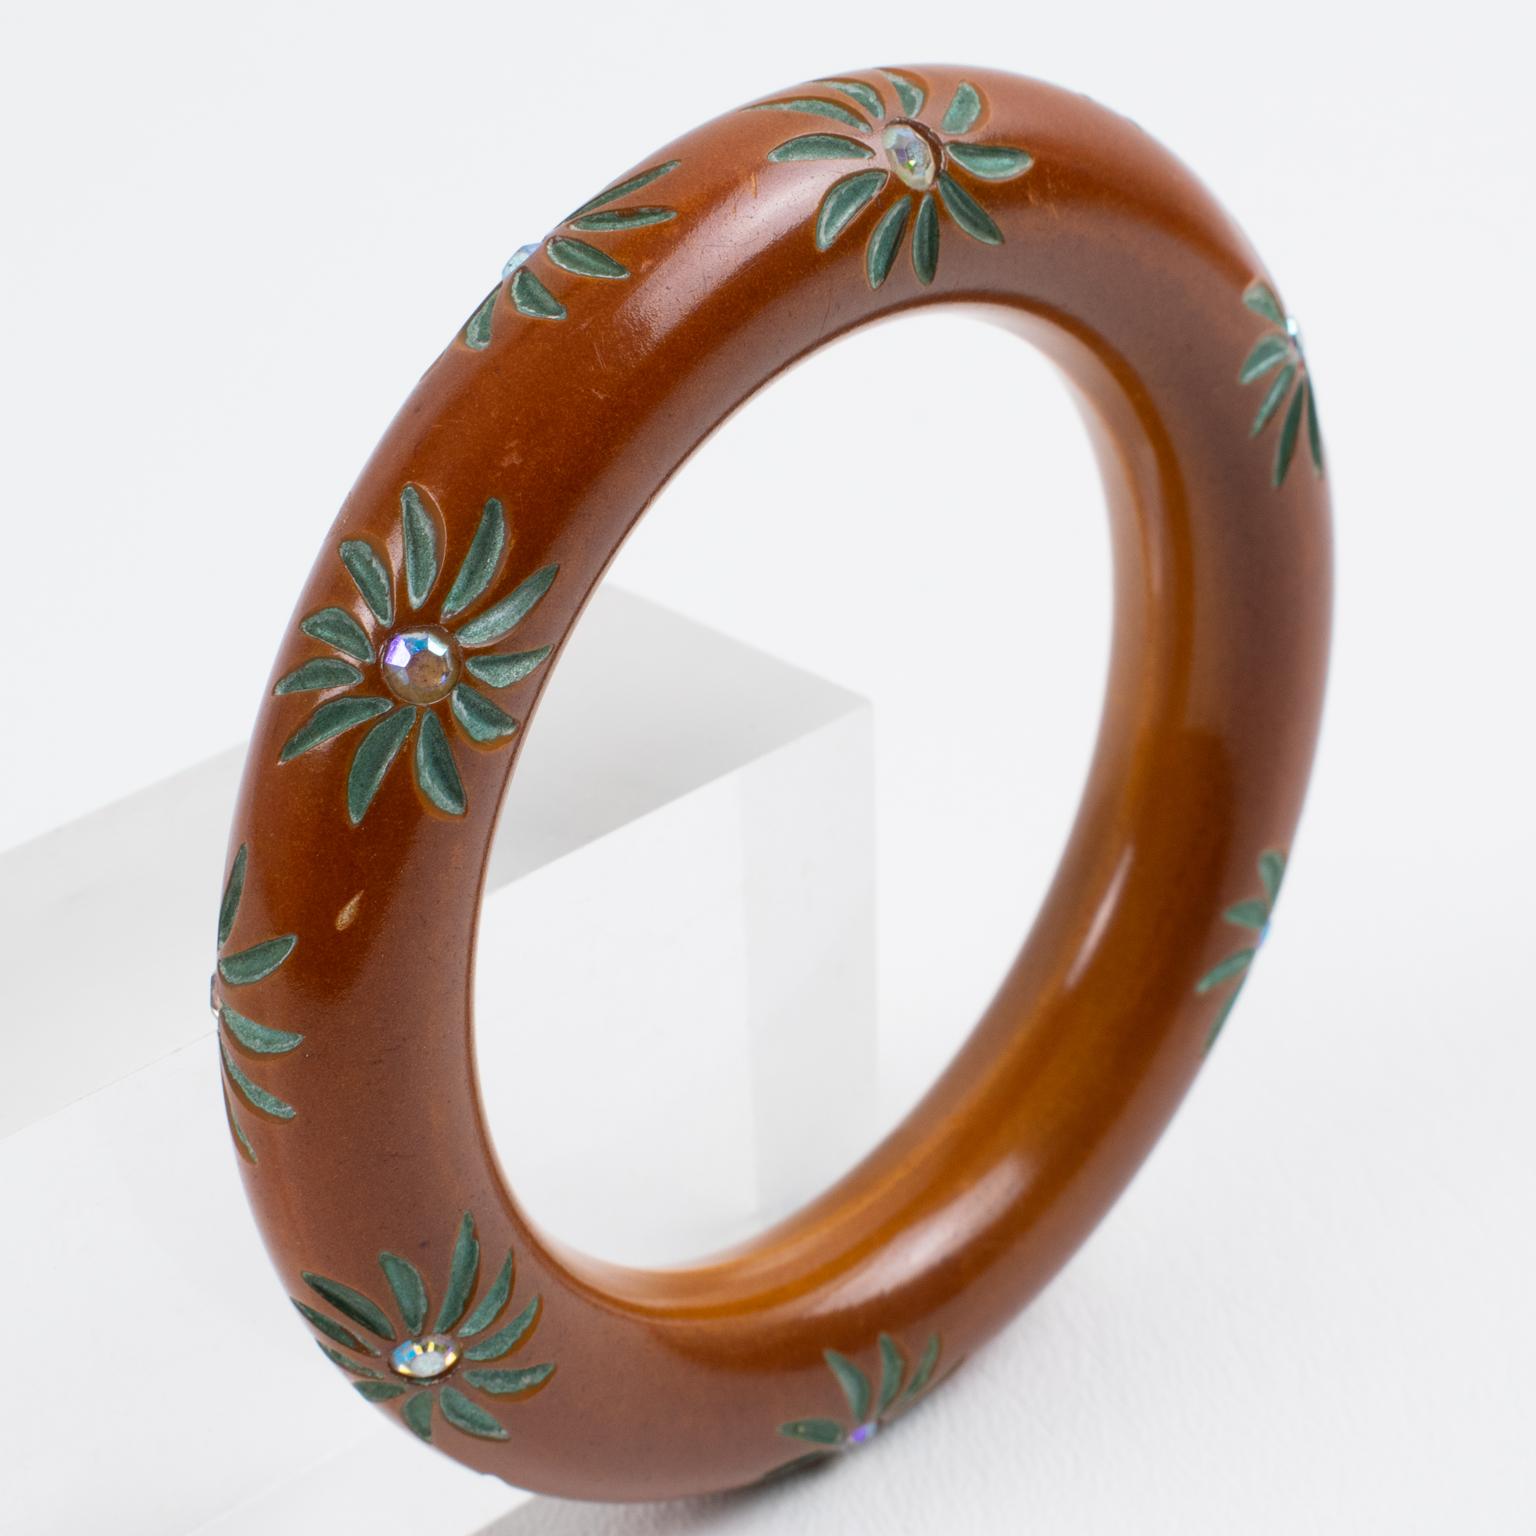 Cinnamon Brown Bakelite Carved Bracelet Bangle with AB Crystal Flowers In Excellent Condition For Sale In Atlanta, GA